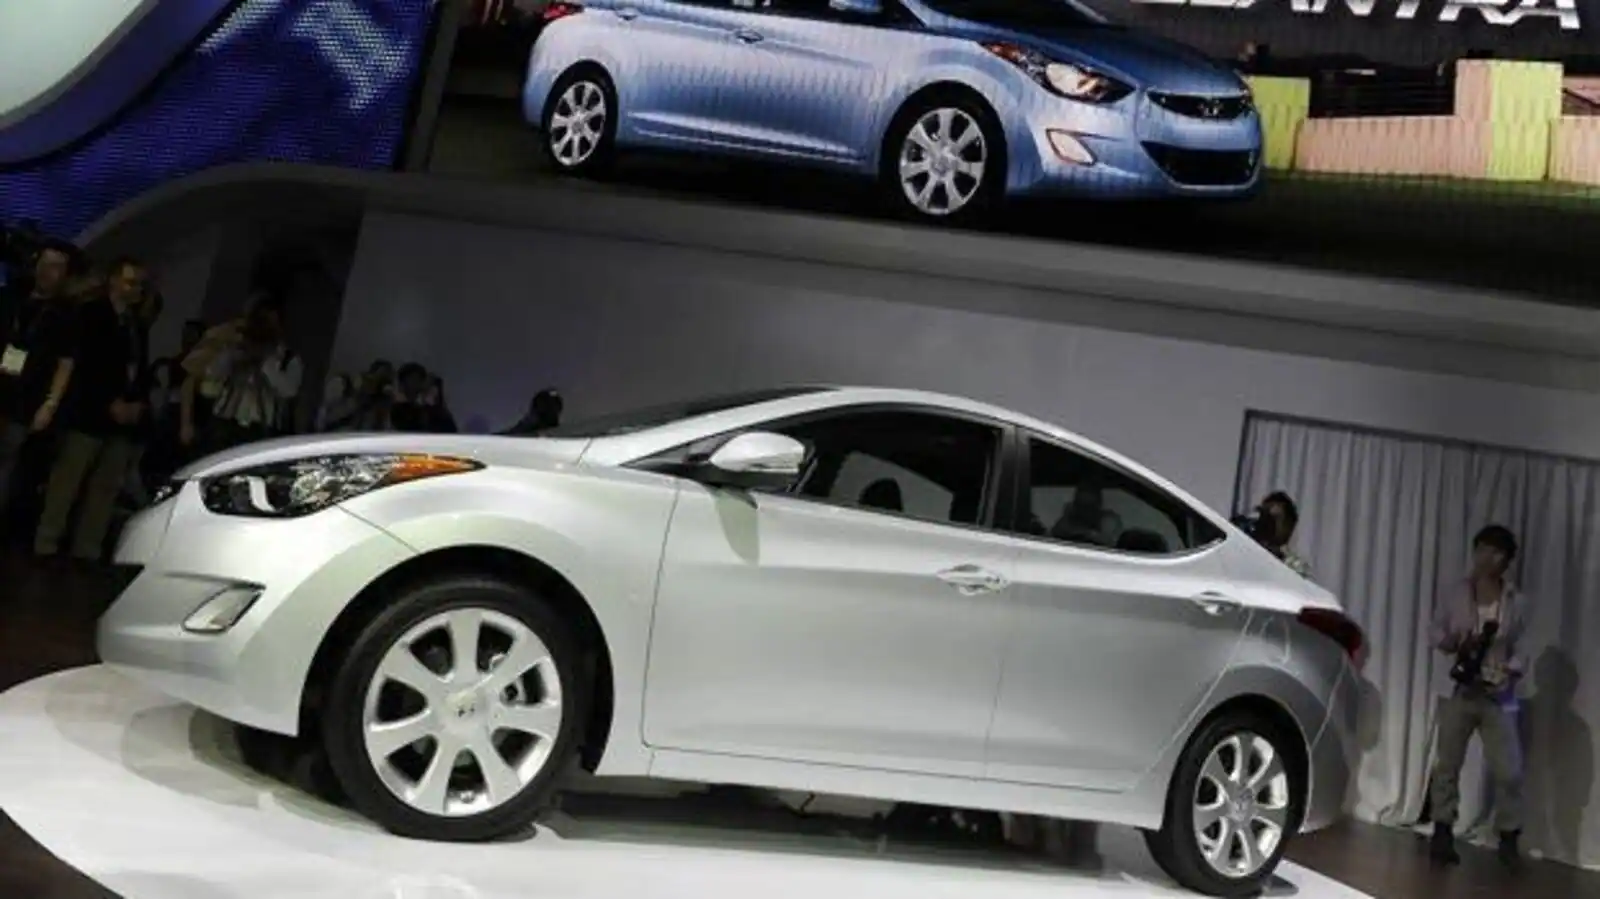 Breaking News: Hyundai Elantra Recall Hits 180K Cars - What You Need to Know About the Trunk Issue Fix